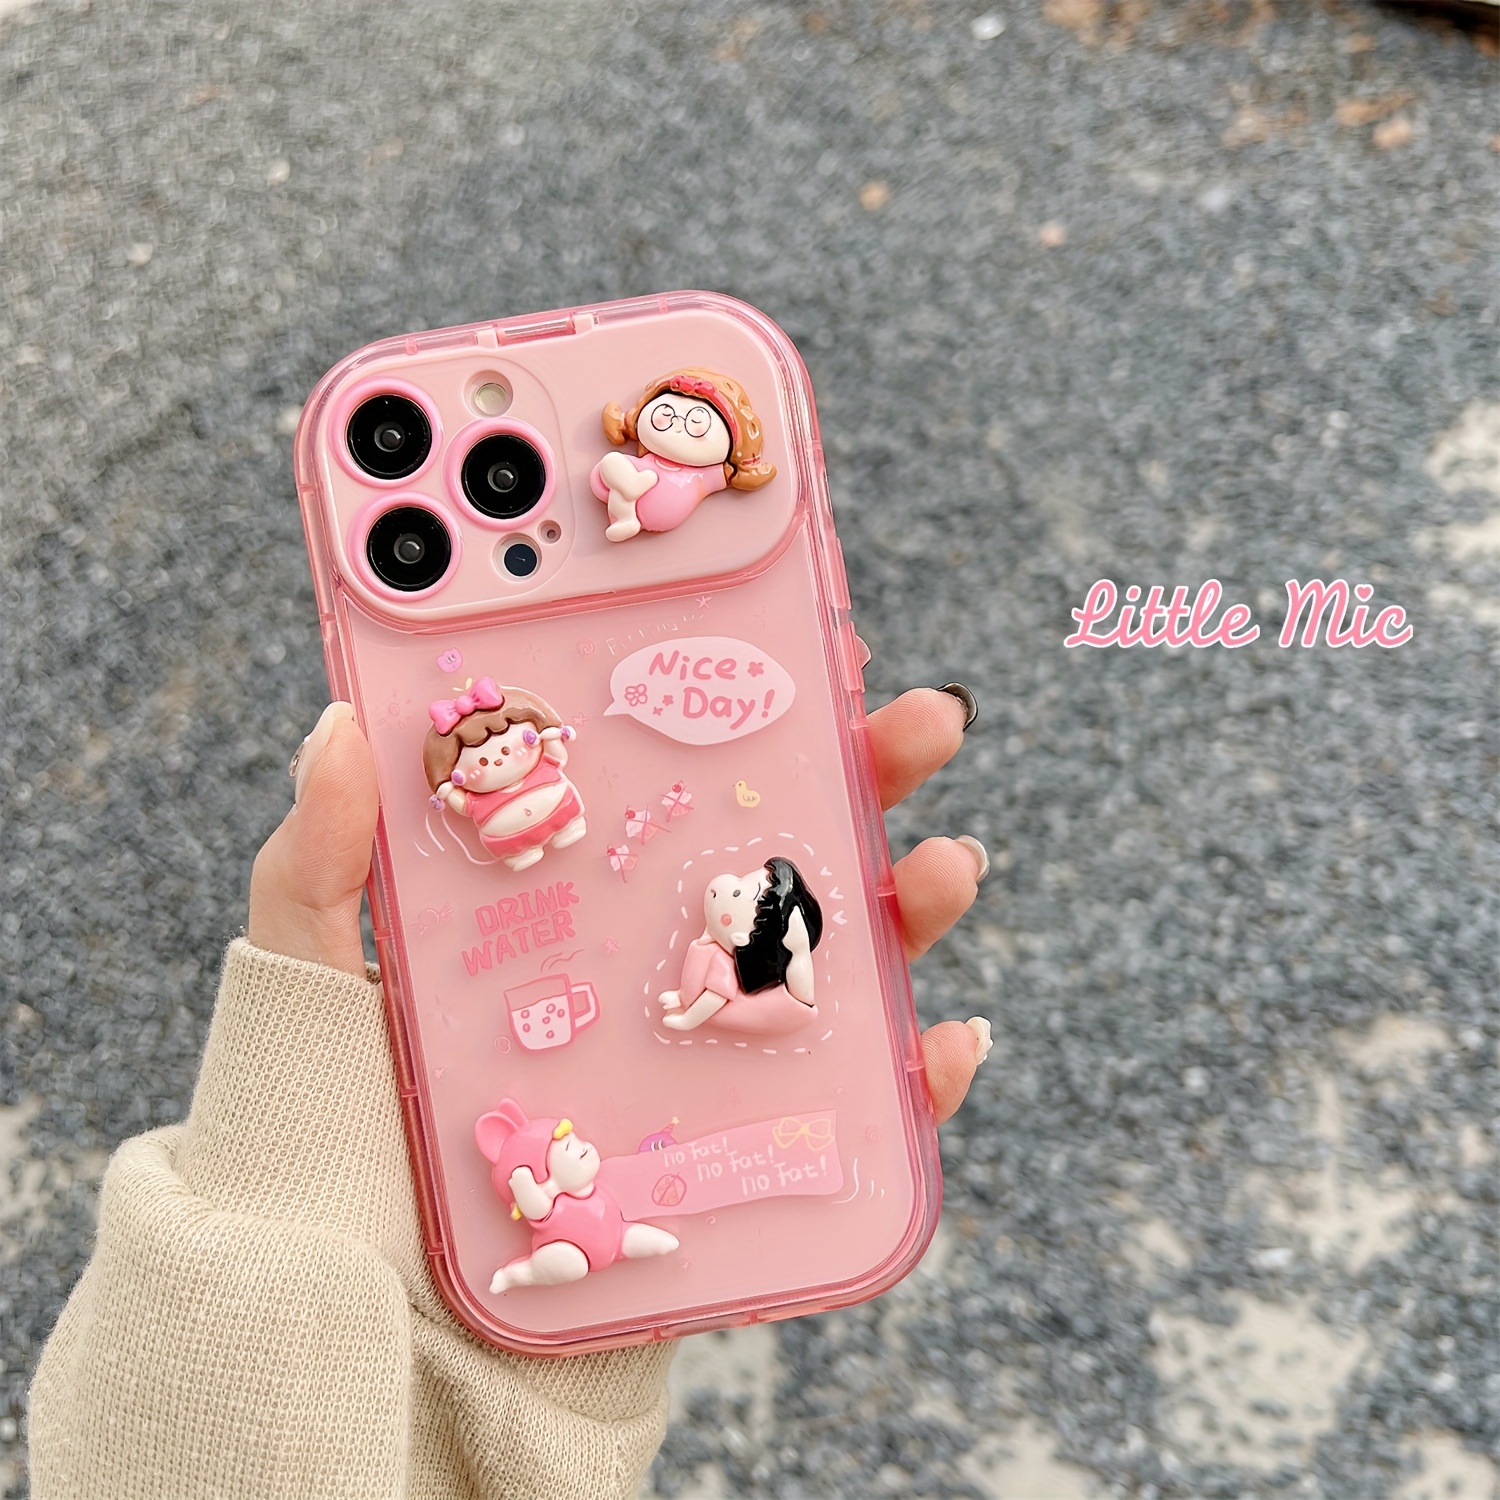 meet my Z flip Pro Max lol 😂💖 found this cute and hilariously big phone  case for my iPhone ! hahah love pink and chunky cases :> sh